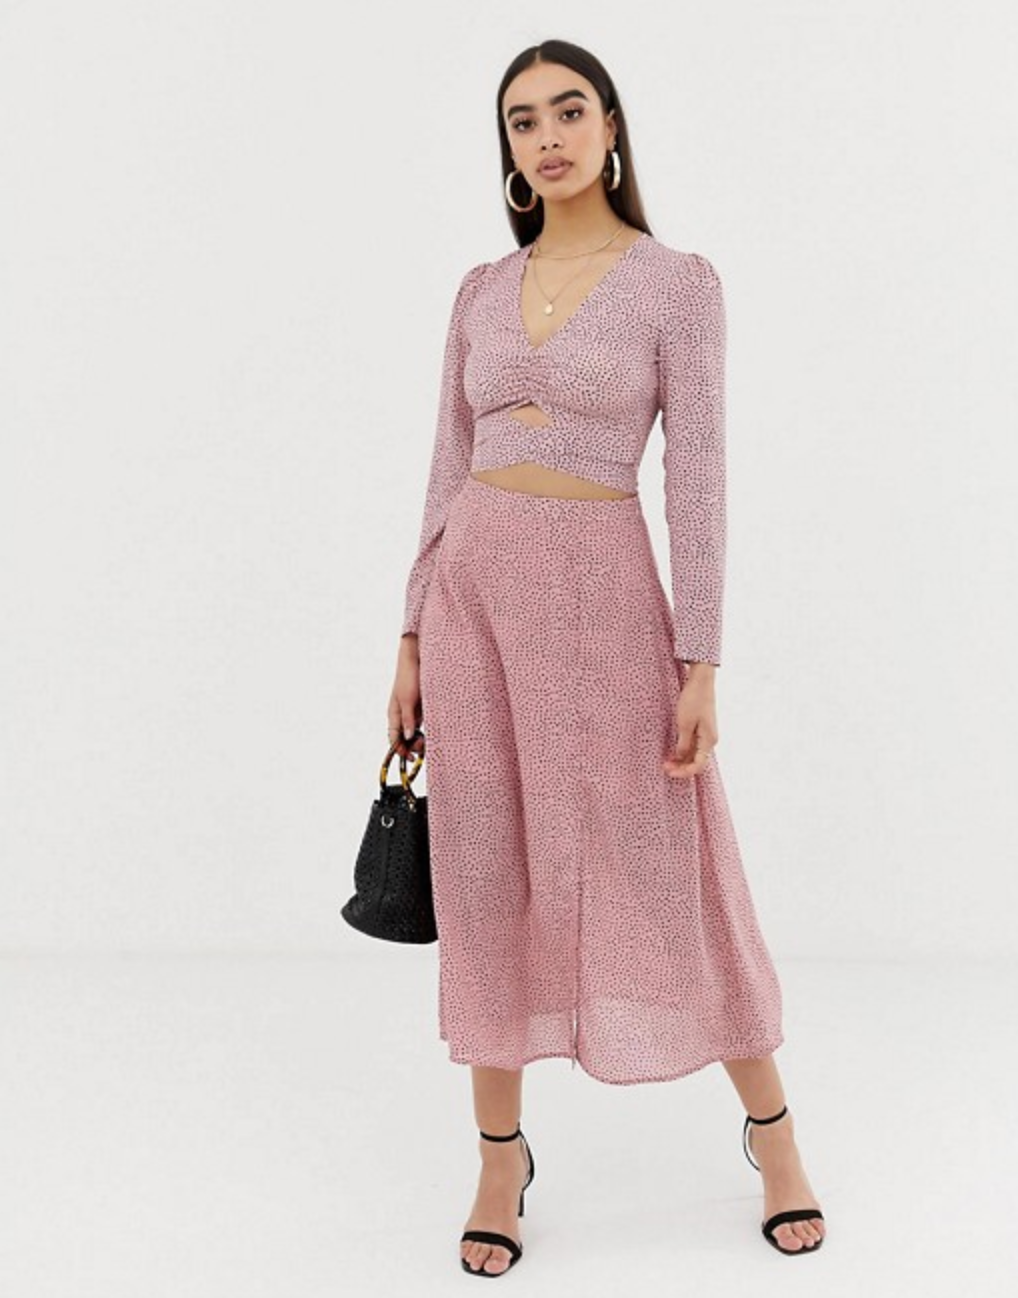 Here's Why You Need a Supercute Two-Piece To Stay Cool This Summer